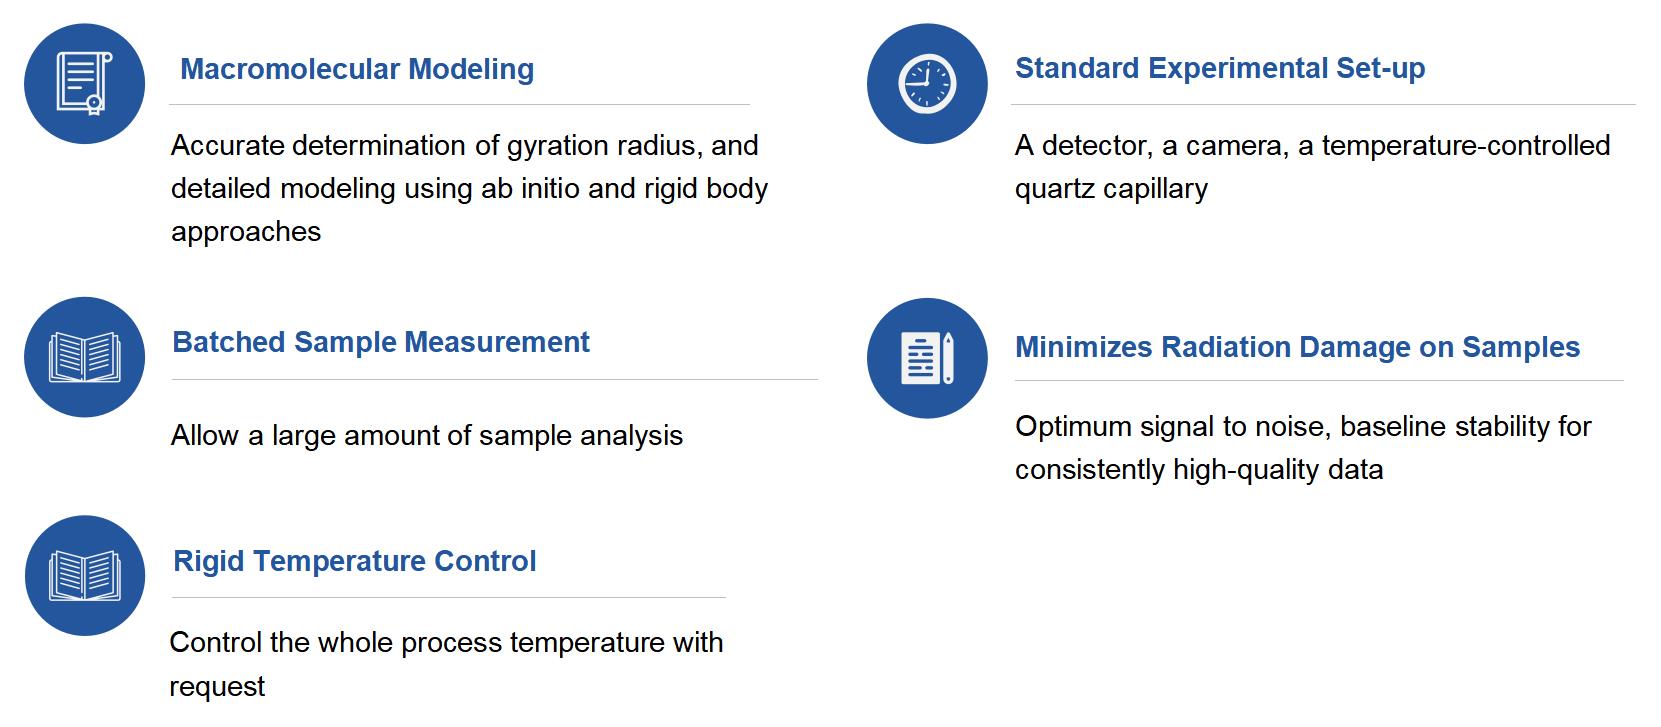 Key Features of the Small-angle Scattering Assay